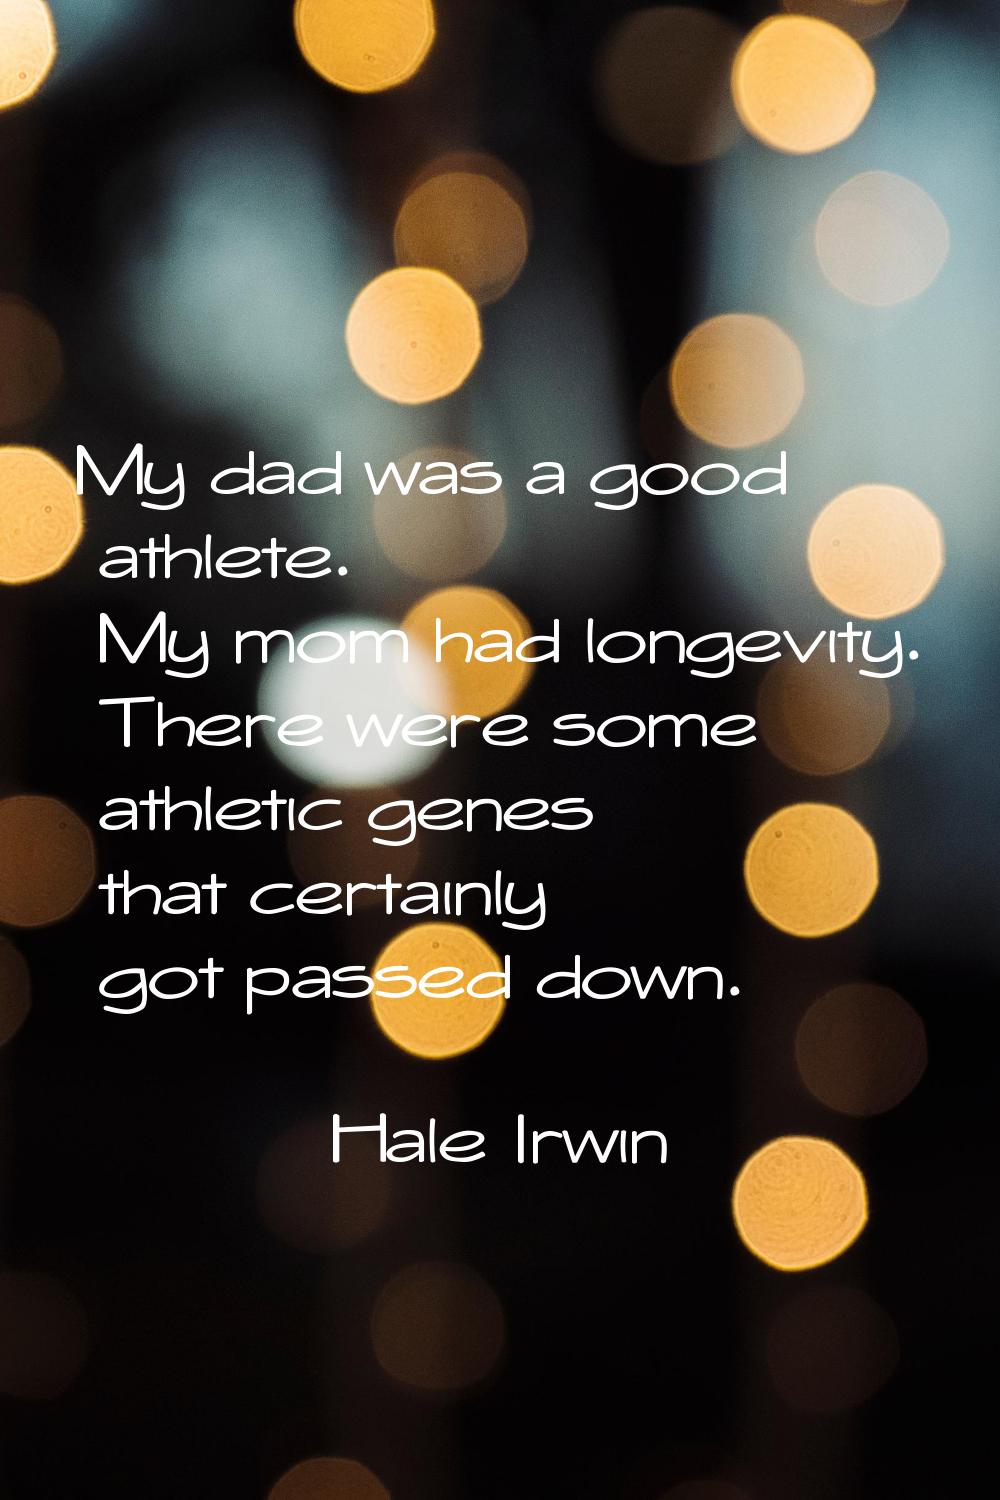 My dad was a good athlete. My mom had longevity. There were some athletic genes that certainly got 